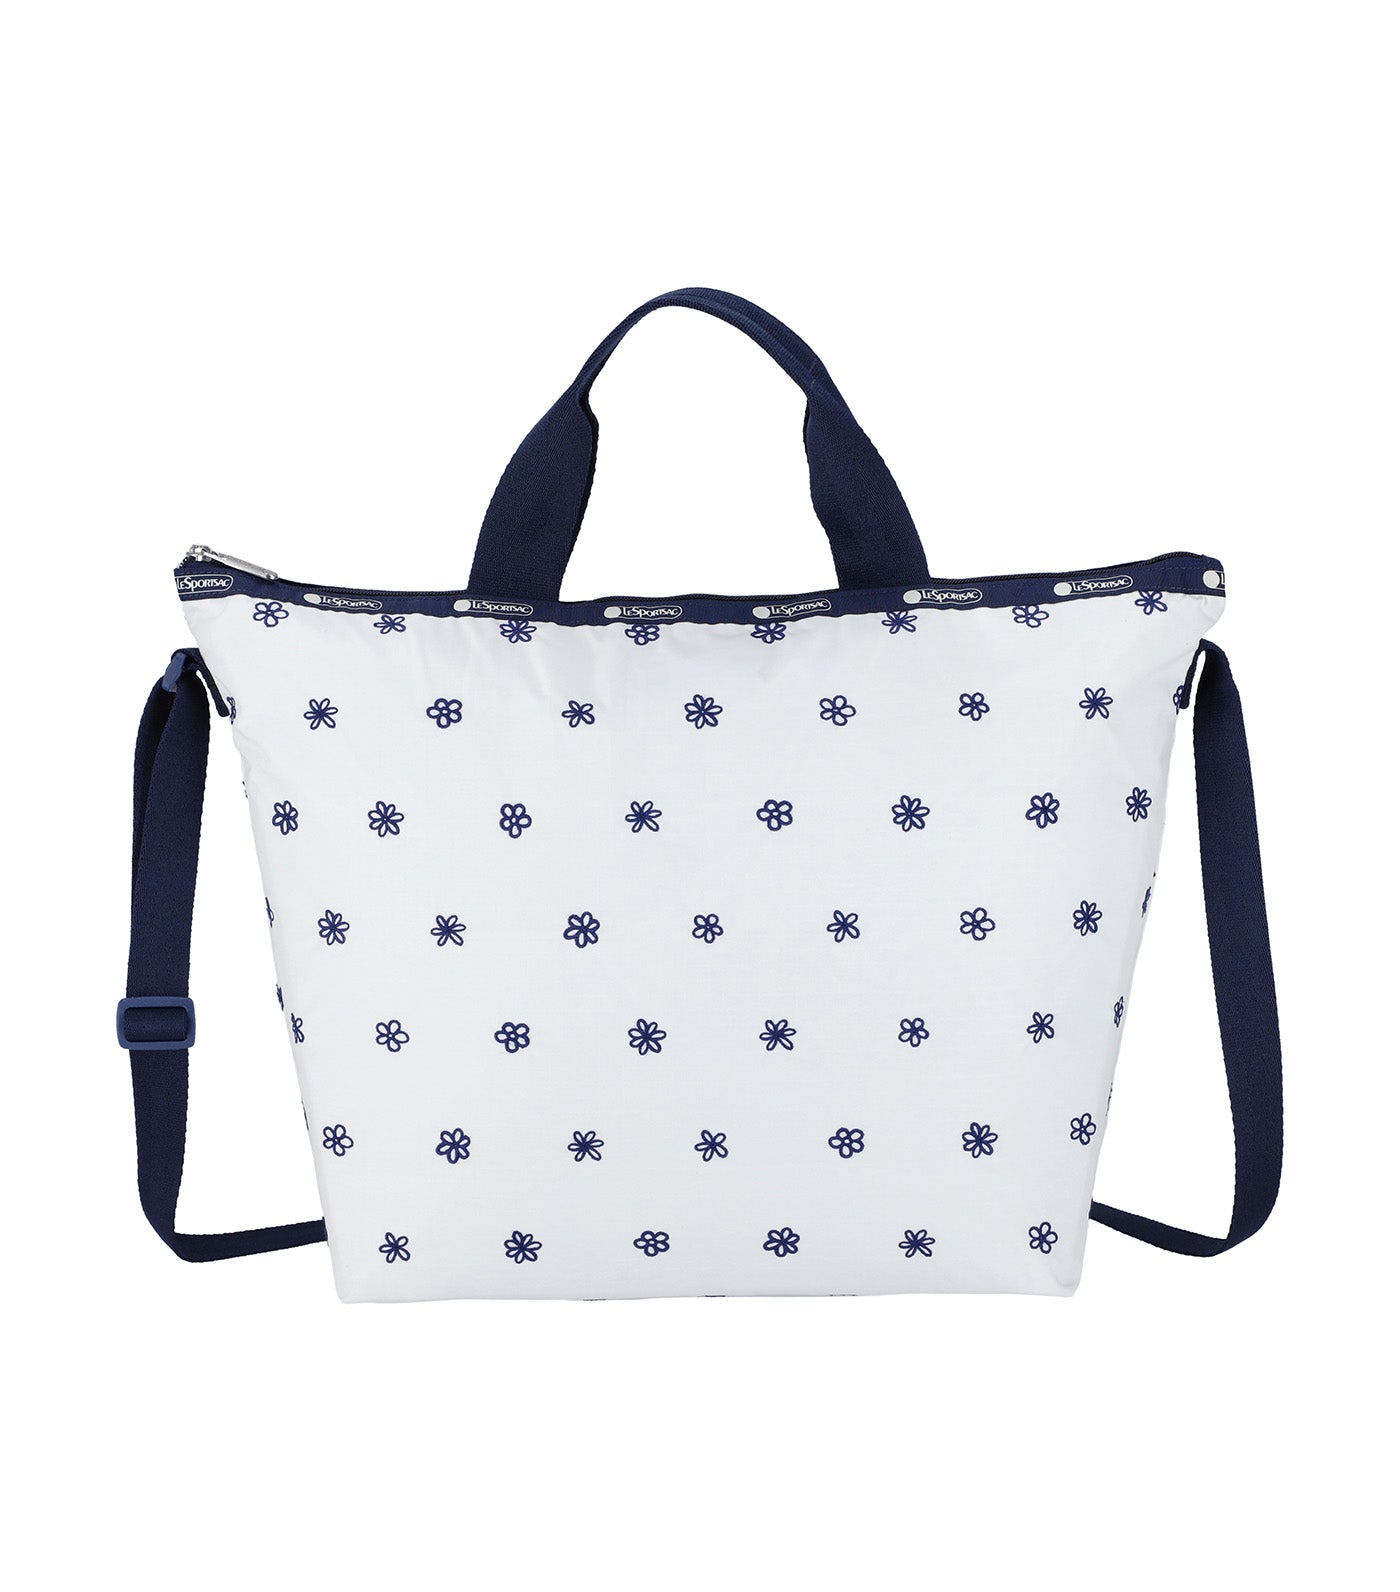 Deluxe Easy Carry Tote Daisy Embroidery